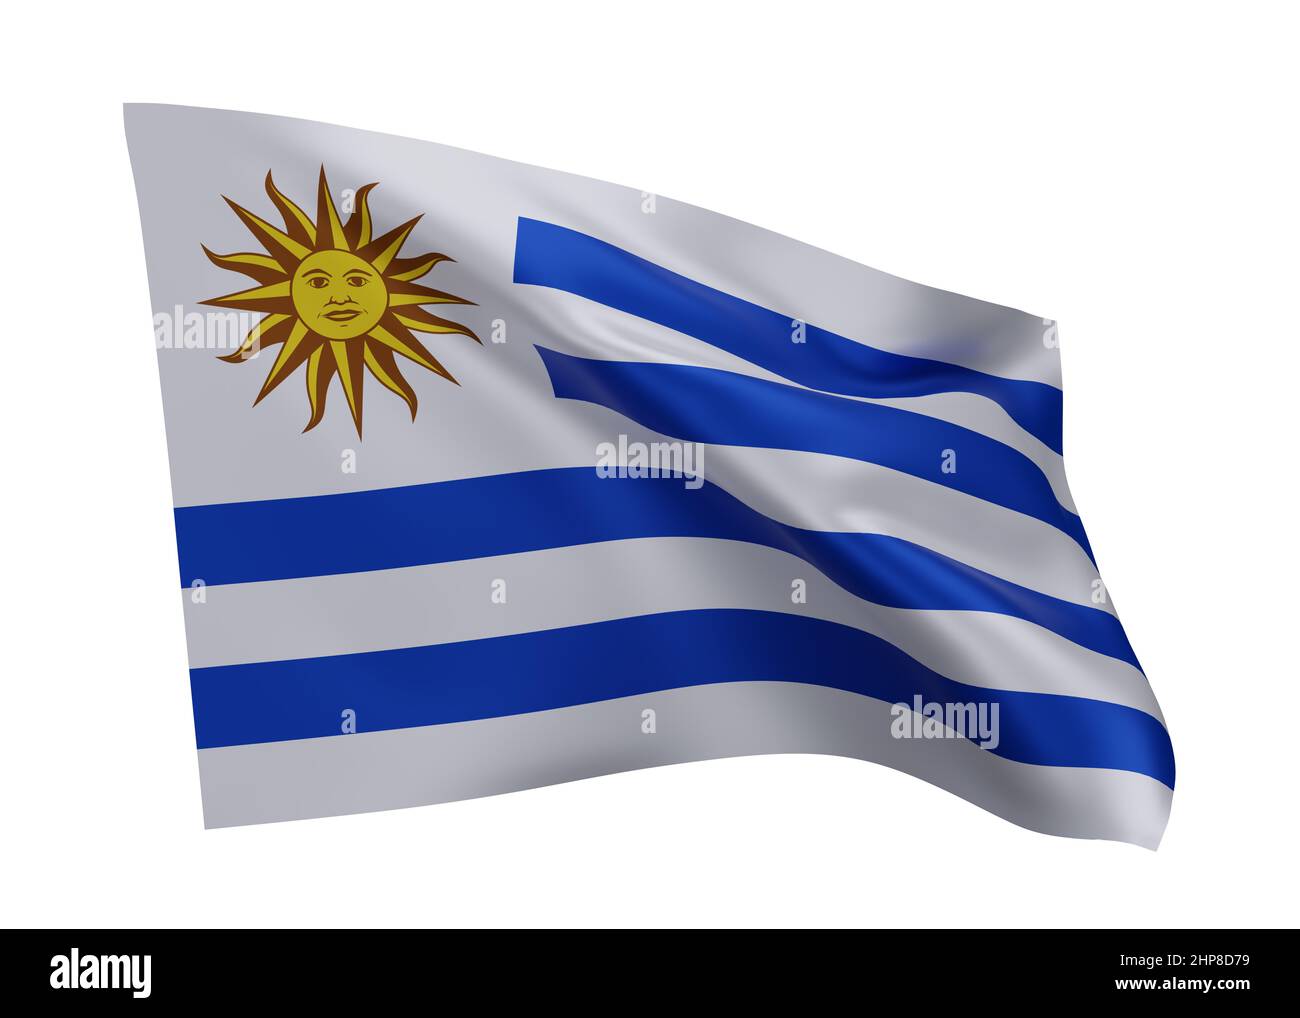 3d illustration flag of Uruguay. Uruguayan high resolution flag isolated against white background. 3d rendering Stock Photo